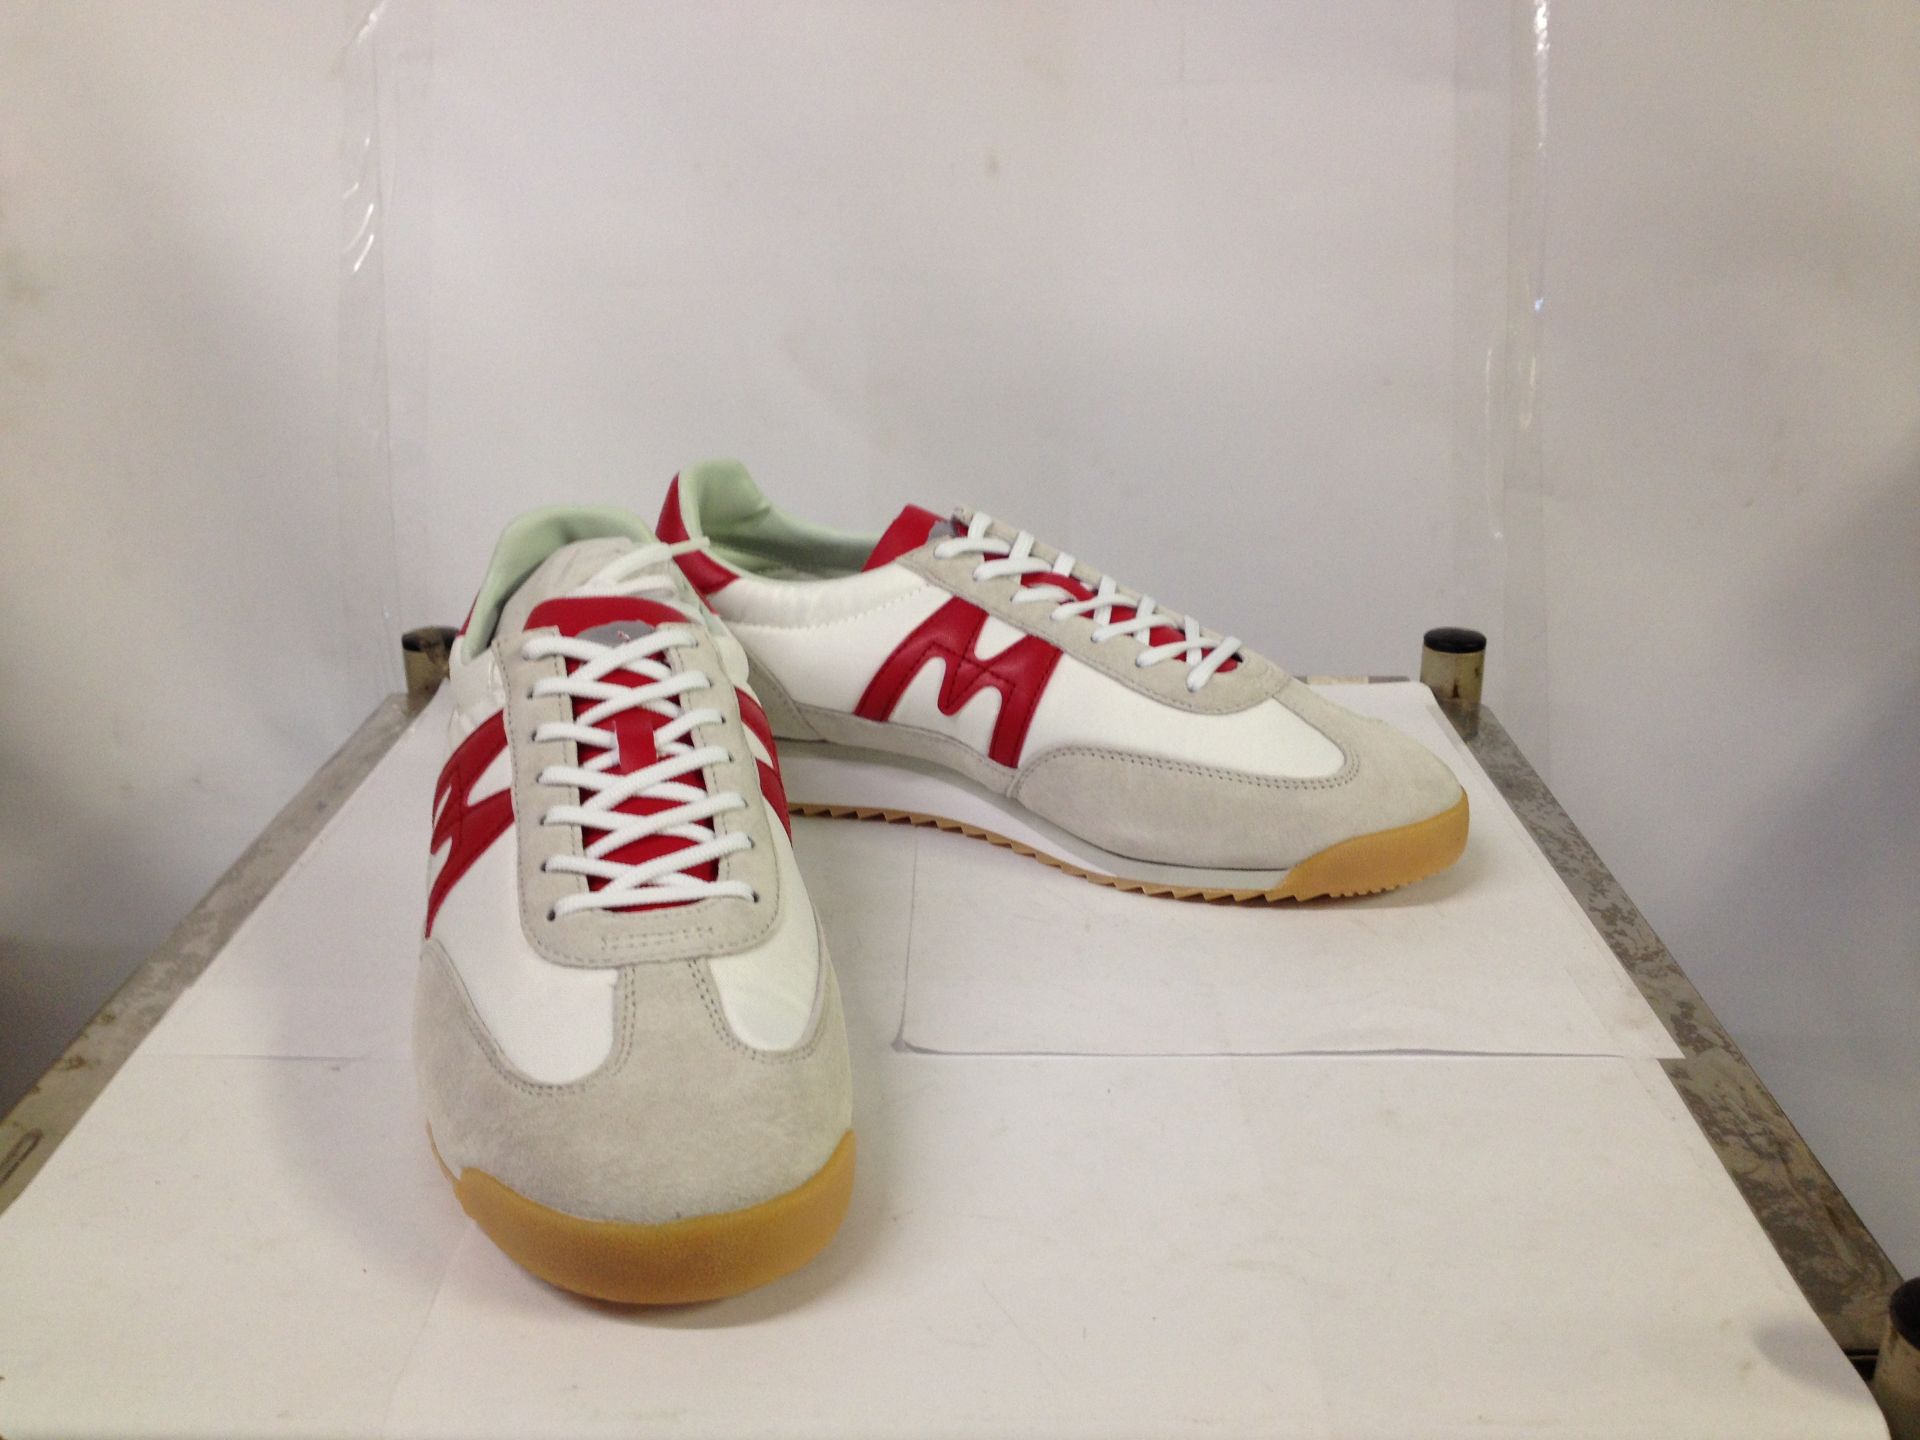 1 x Karhu Trainers | Championair | Colour: Bright White/Racing Red | UK Size: 10 | RRP £ 85 - Image 2 of 2